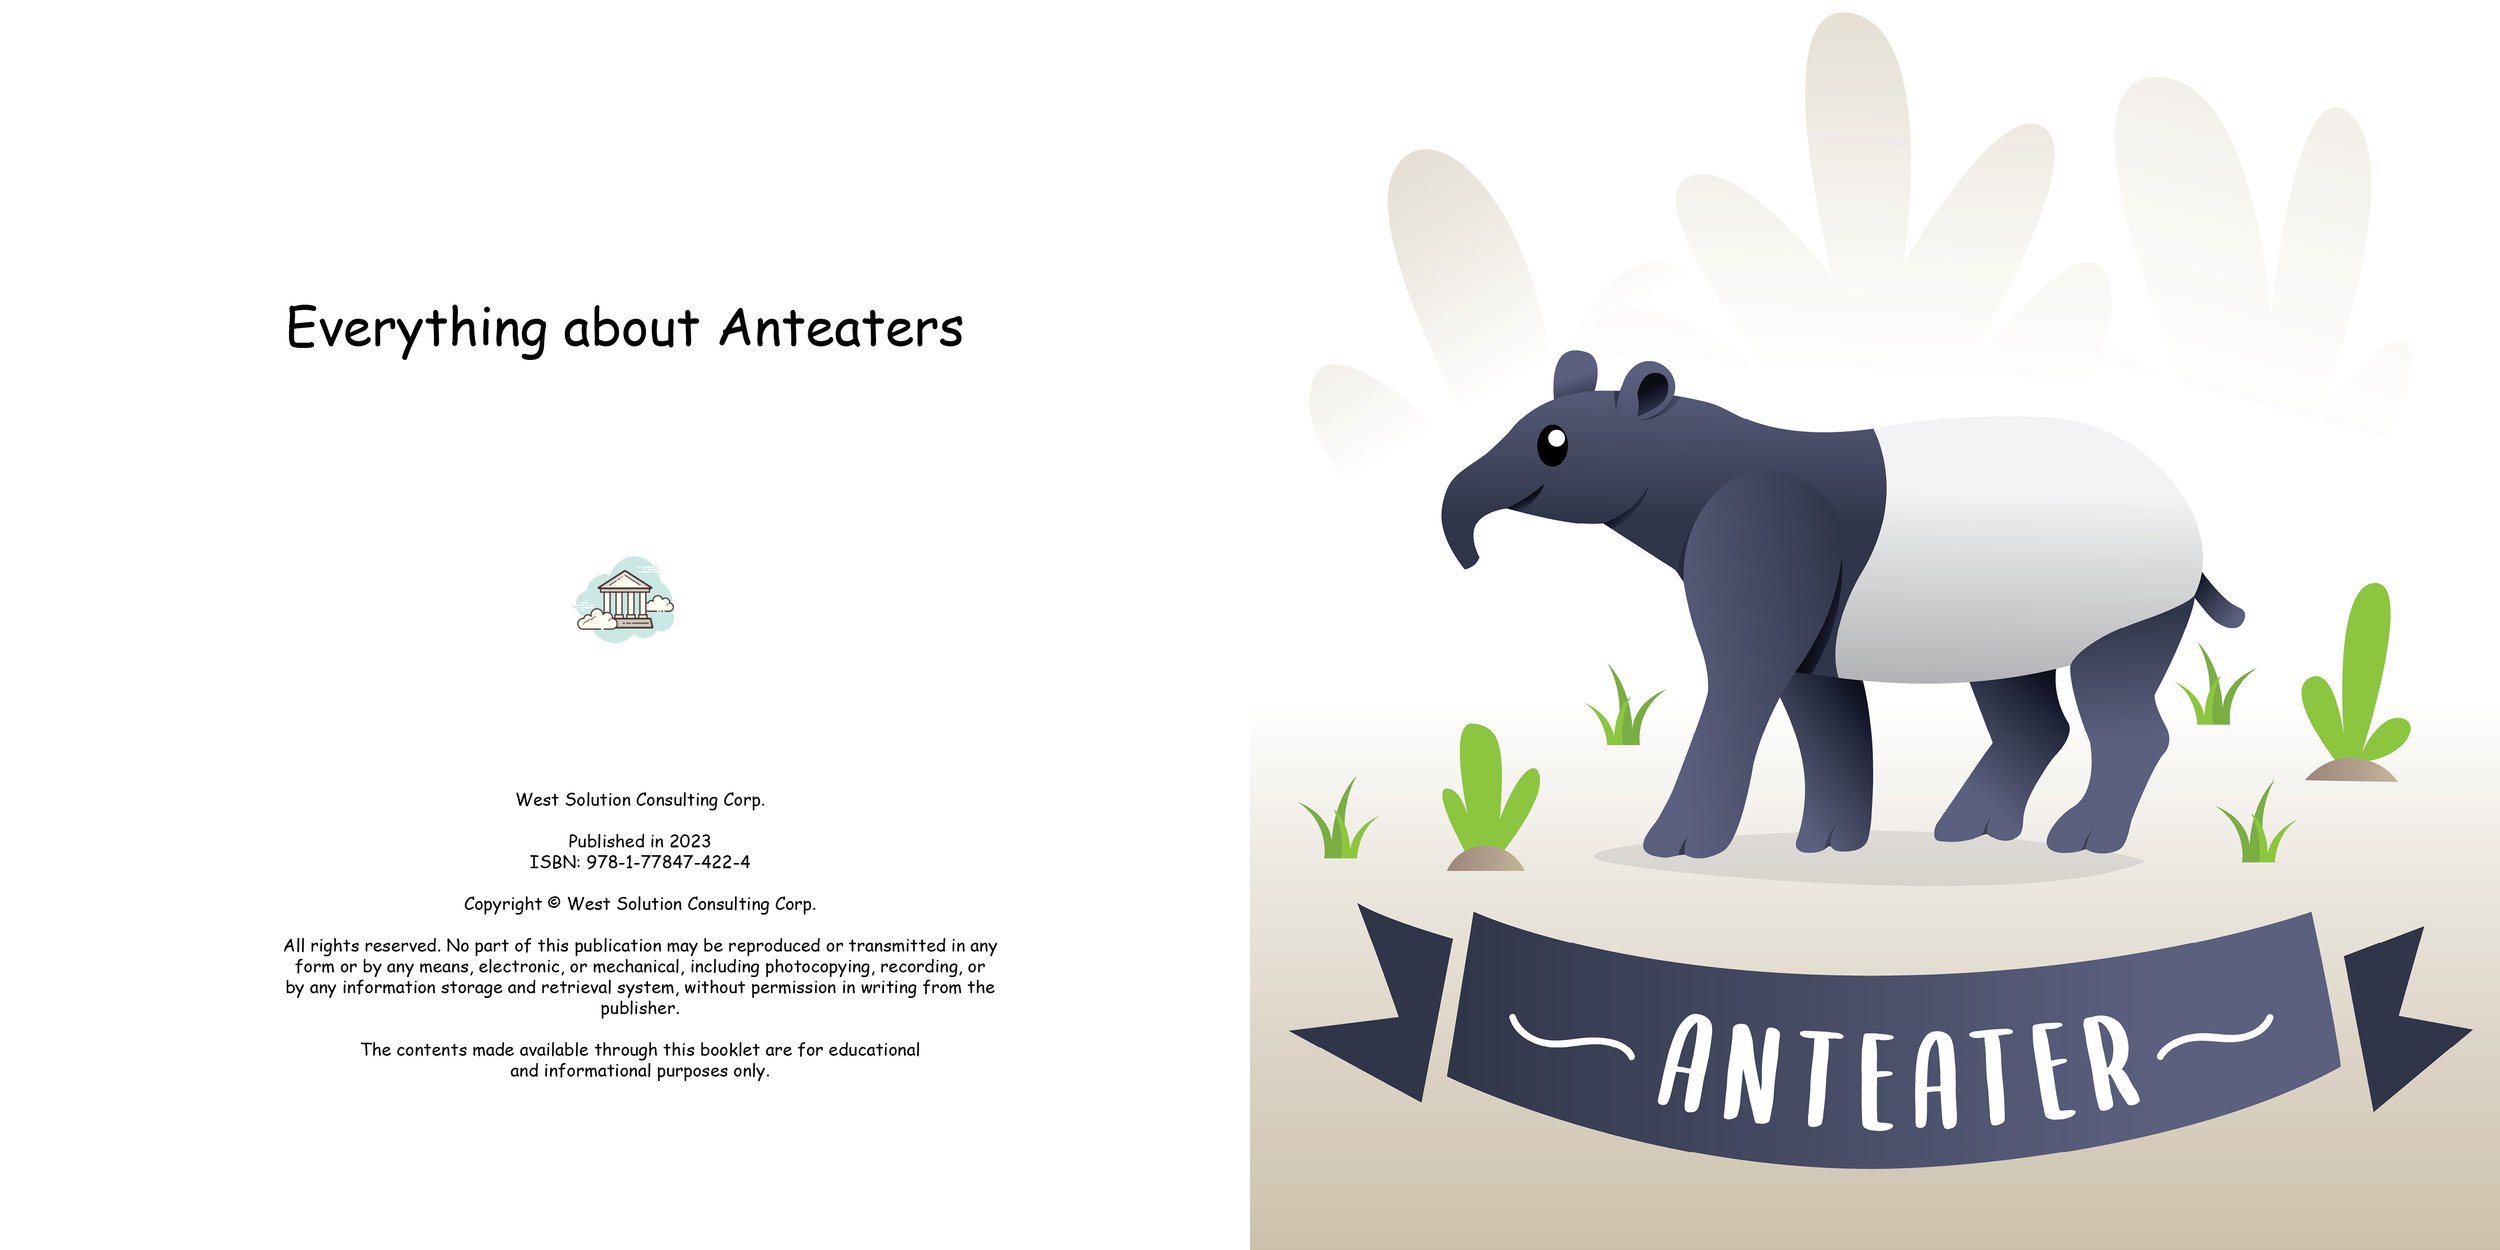 Everything about Anteaters2.jpg